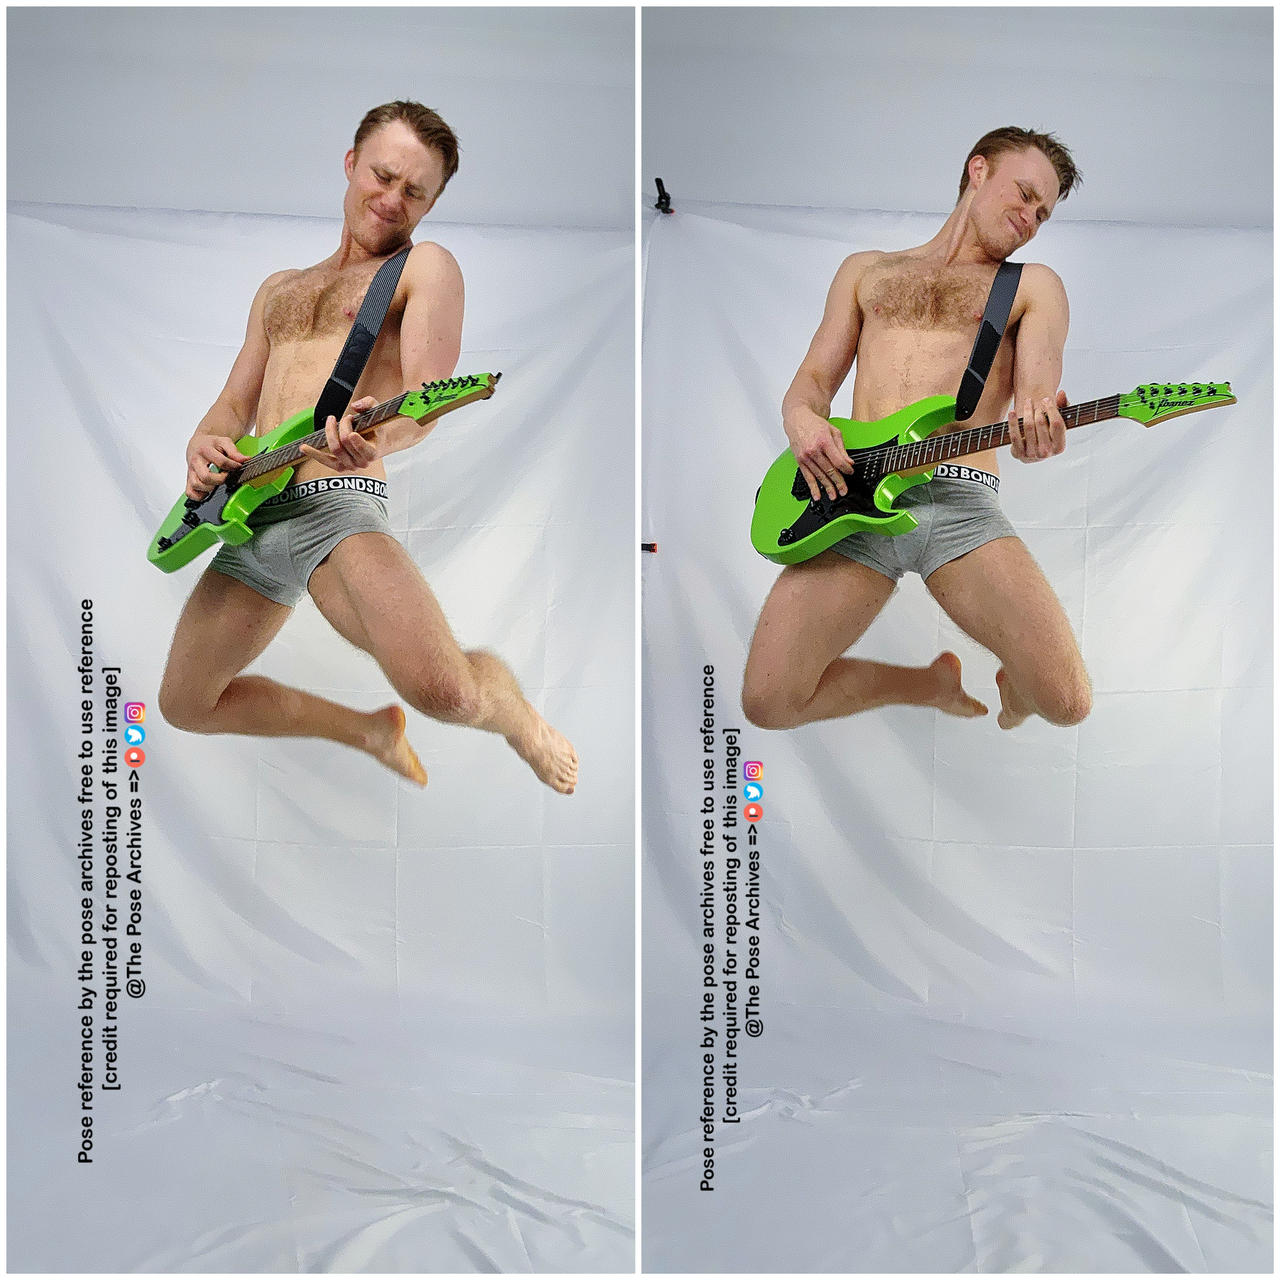 Male Playing Guitar in Air Pose by theposearchives on DeviantArt